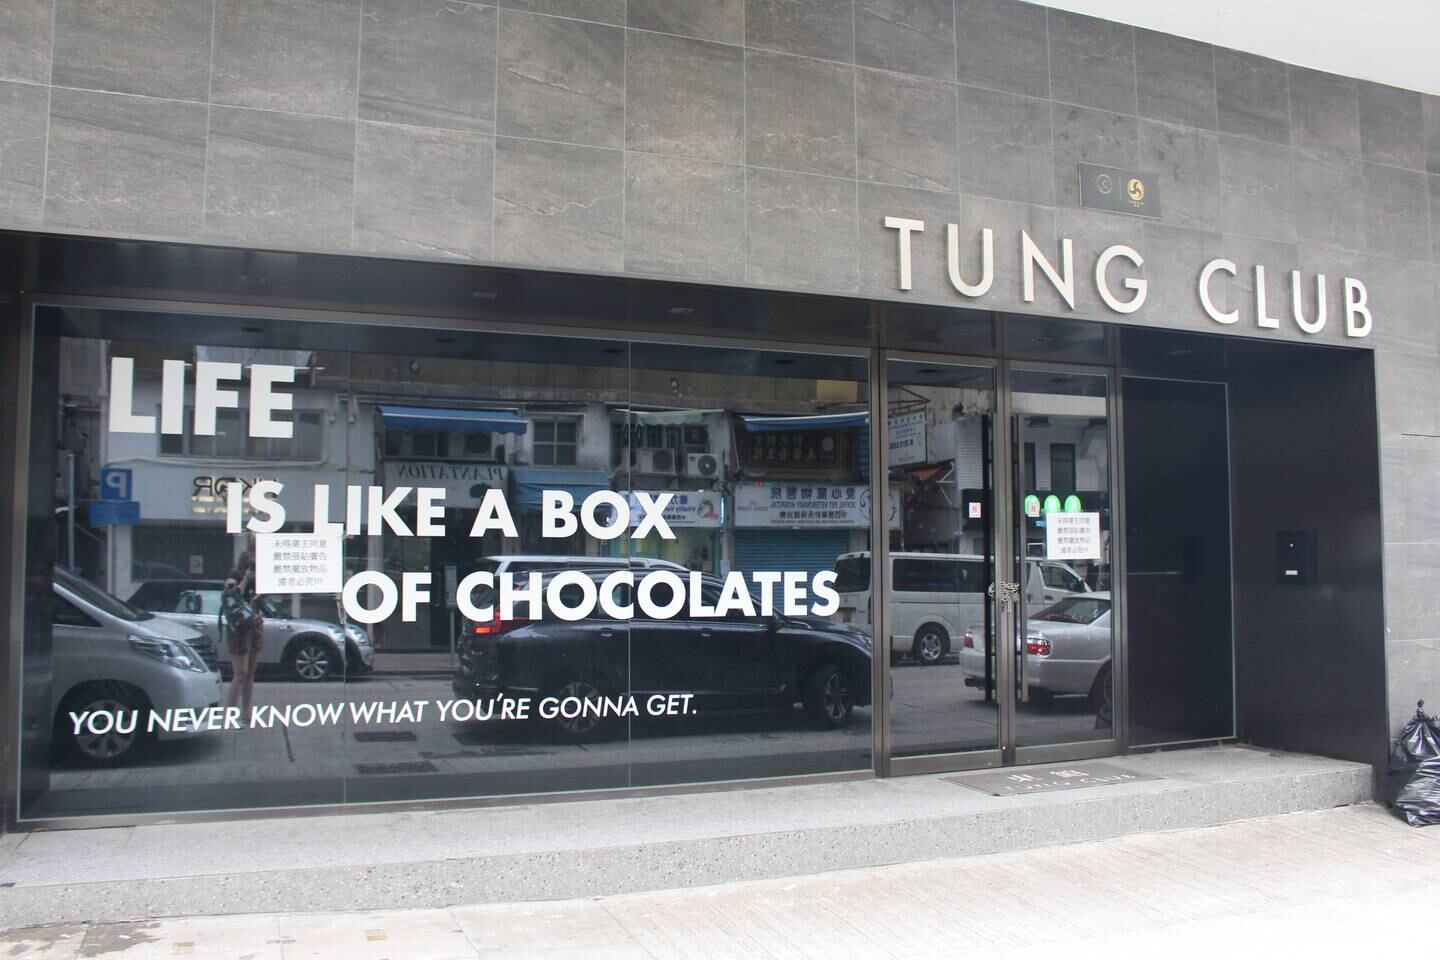 Tung Club in Kennedy Town was run by local crypto influencer Henry Choi.